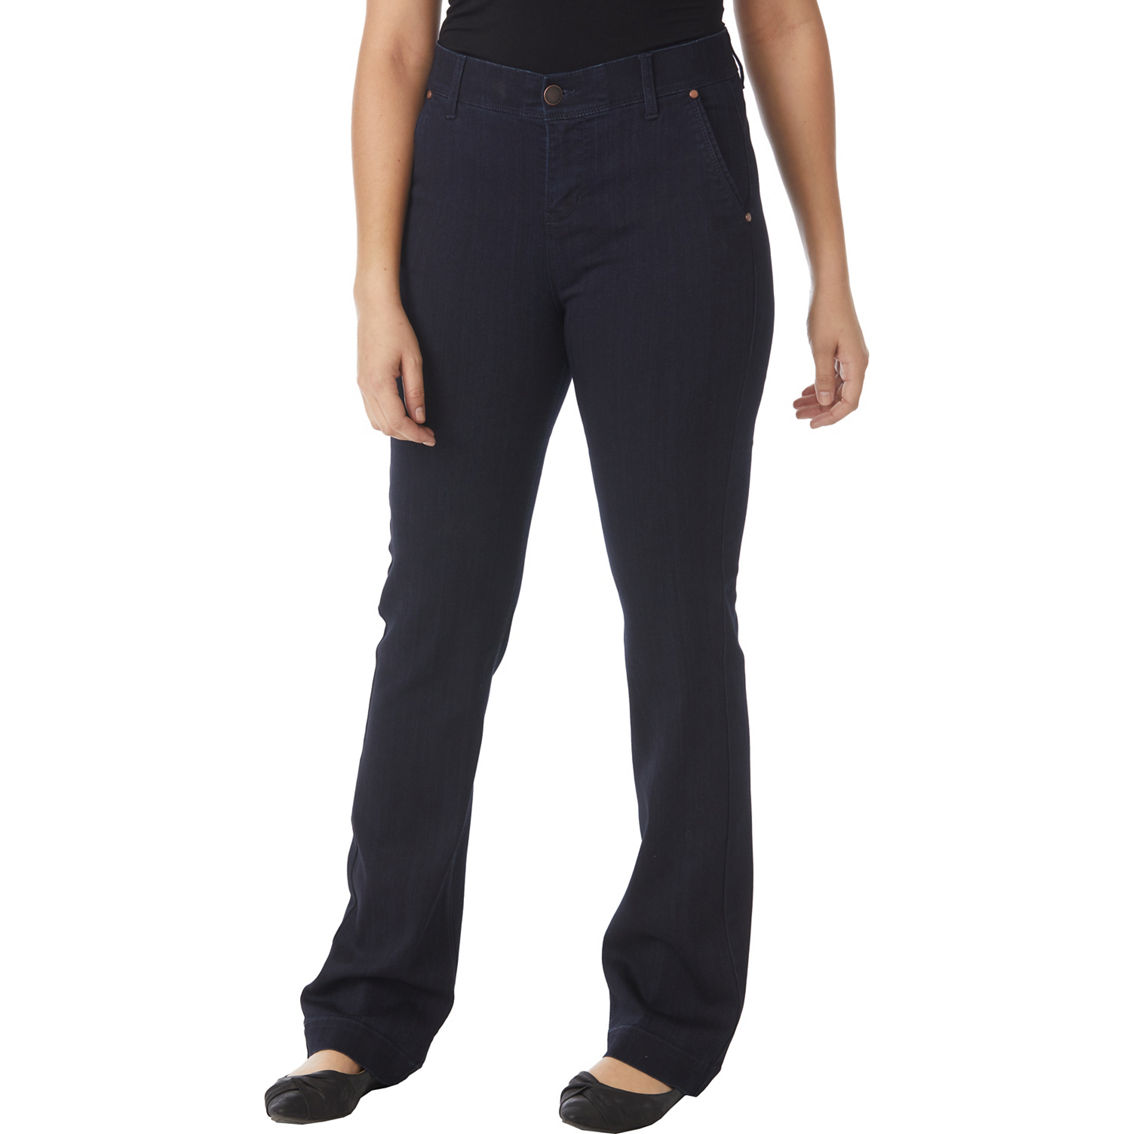 JW Fit Solution Jean Trousers - Image 3 of 3